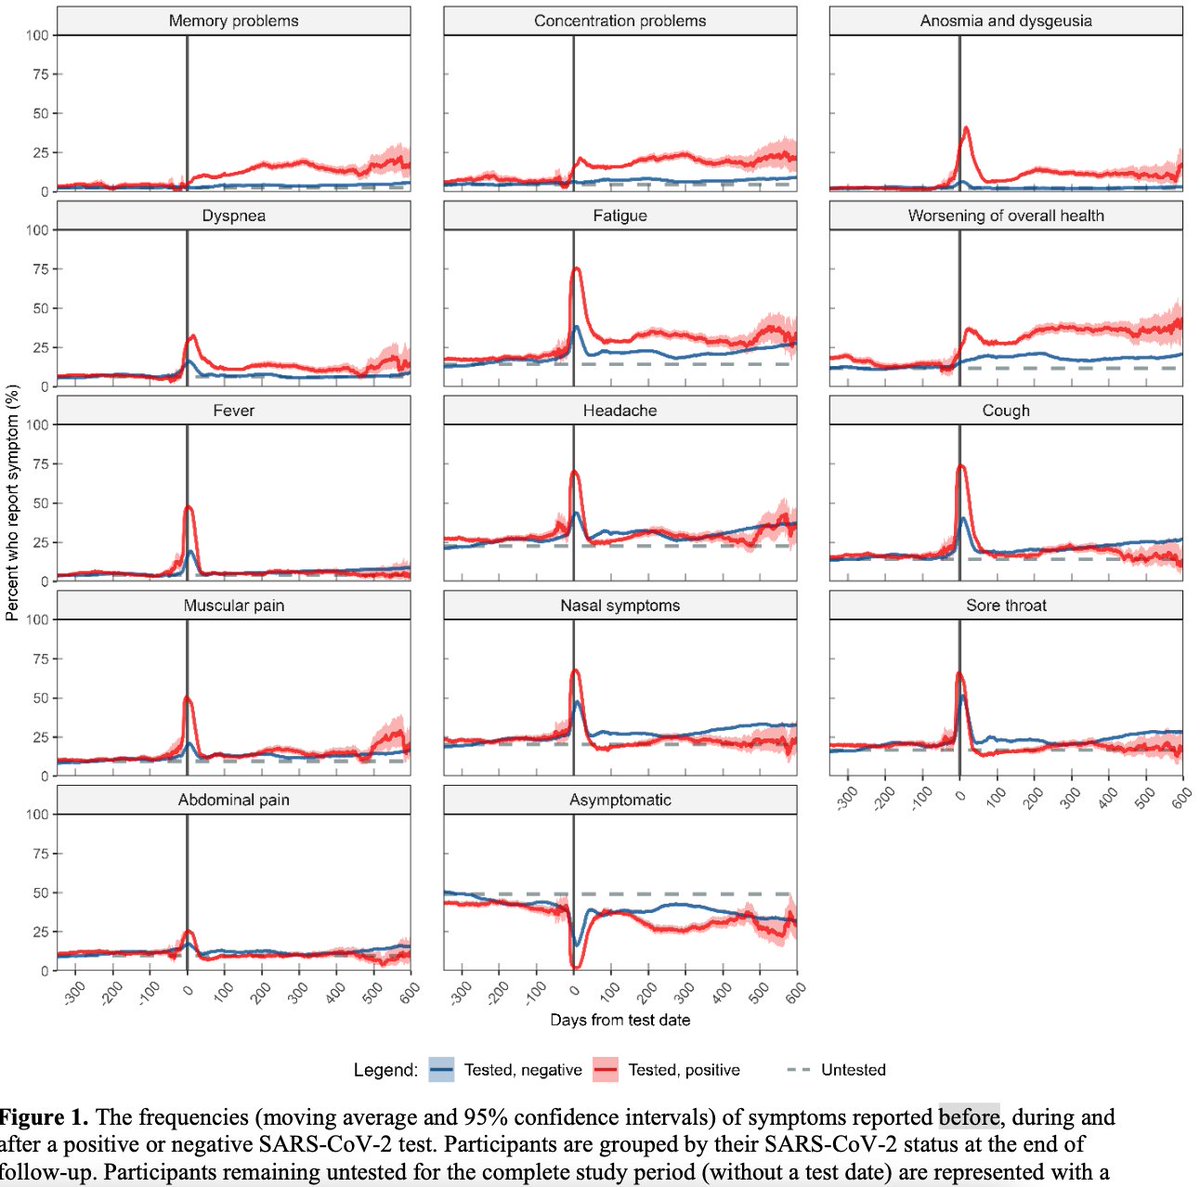 New large Long Covid study preprint out of Norway, 22 months followup. Clearly identifies cognitive issues and very elevated self-reported 'worsening of overall health' among people confirmed infected with the virus. medrxiv.org/content/10.110…